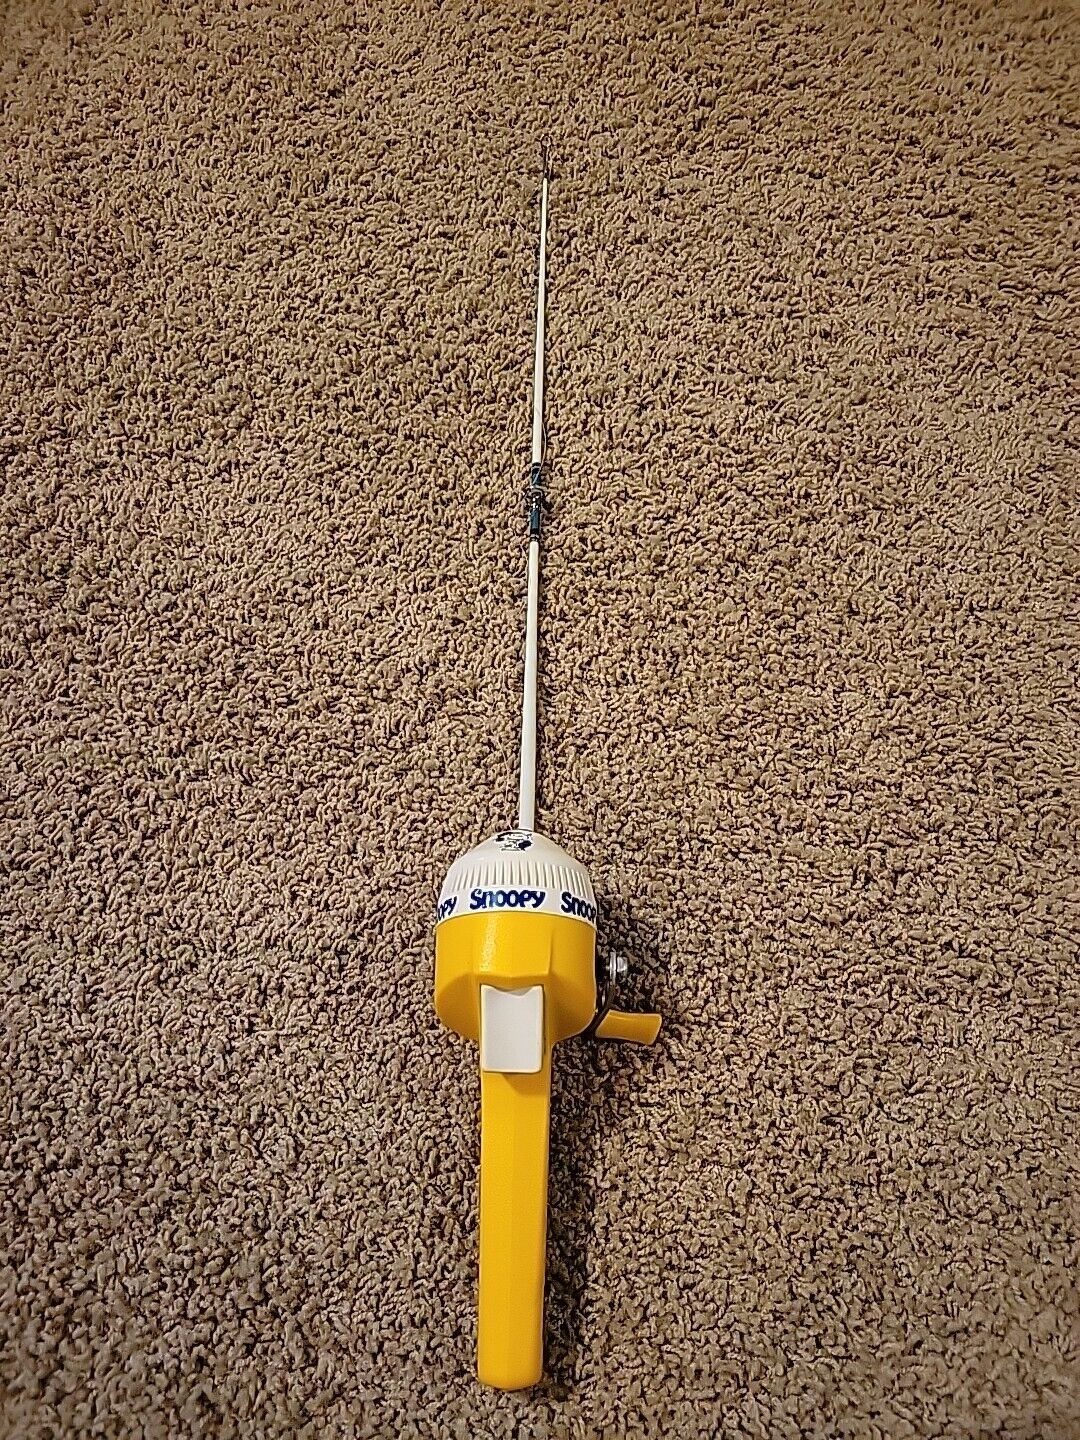 Vintage 1988 Snoopy Zebco Reel, Yellow/White Fishing Pole 24” Tested WORKS